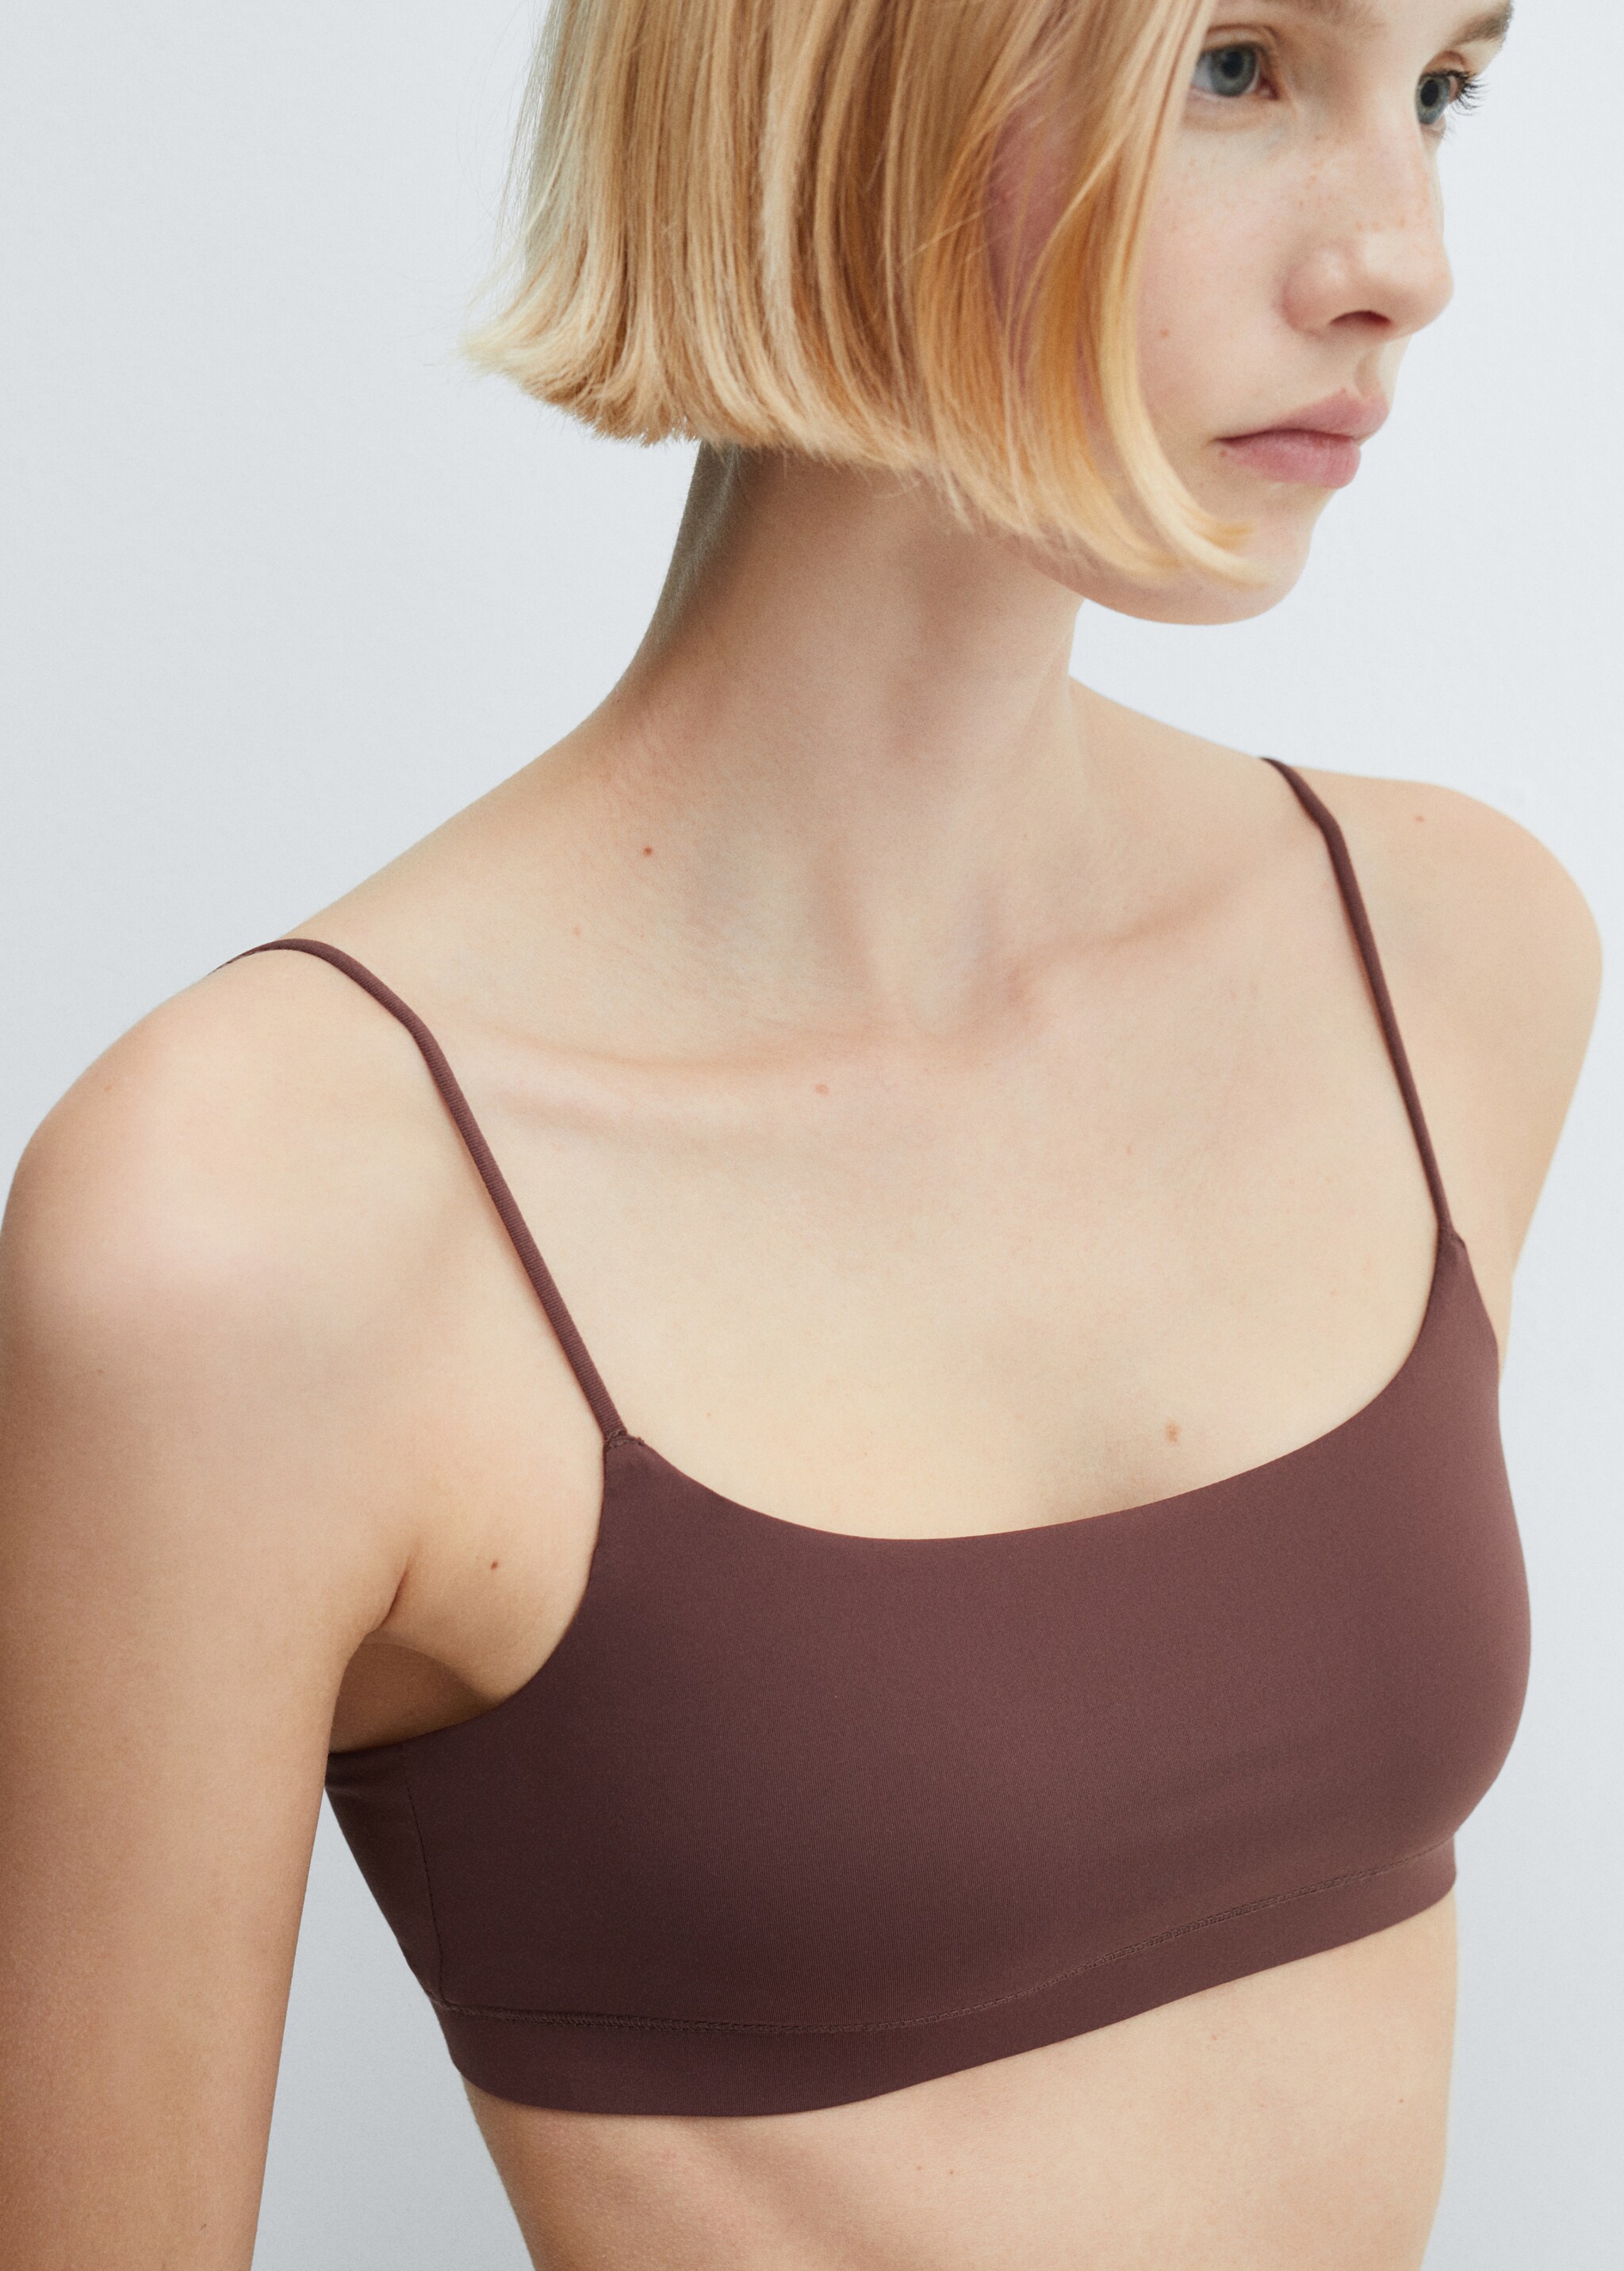 Cropped top with thin straps - Details of the article 1